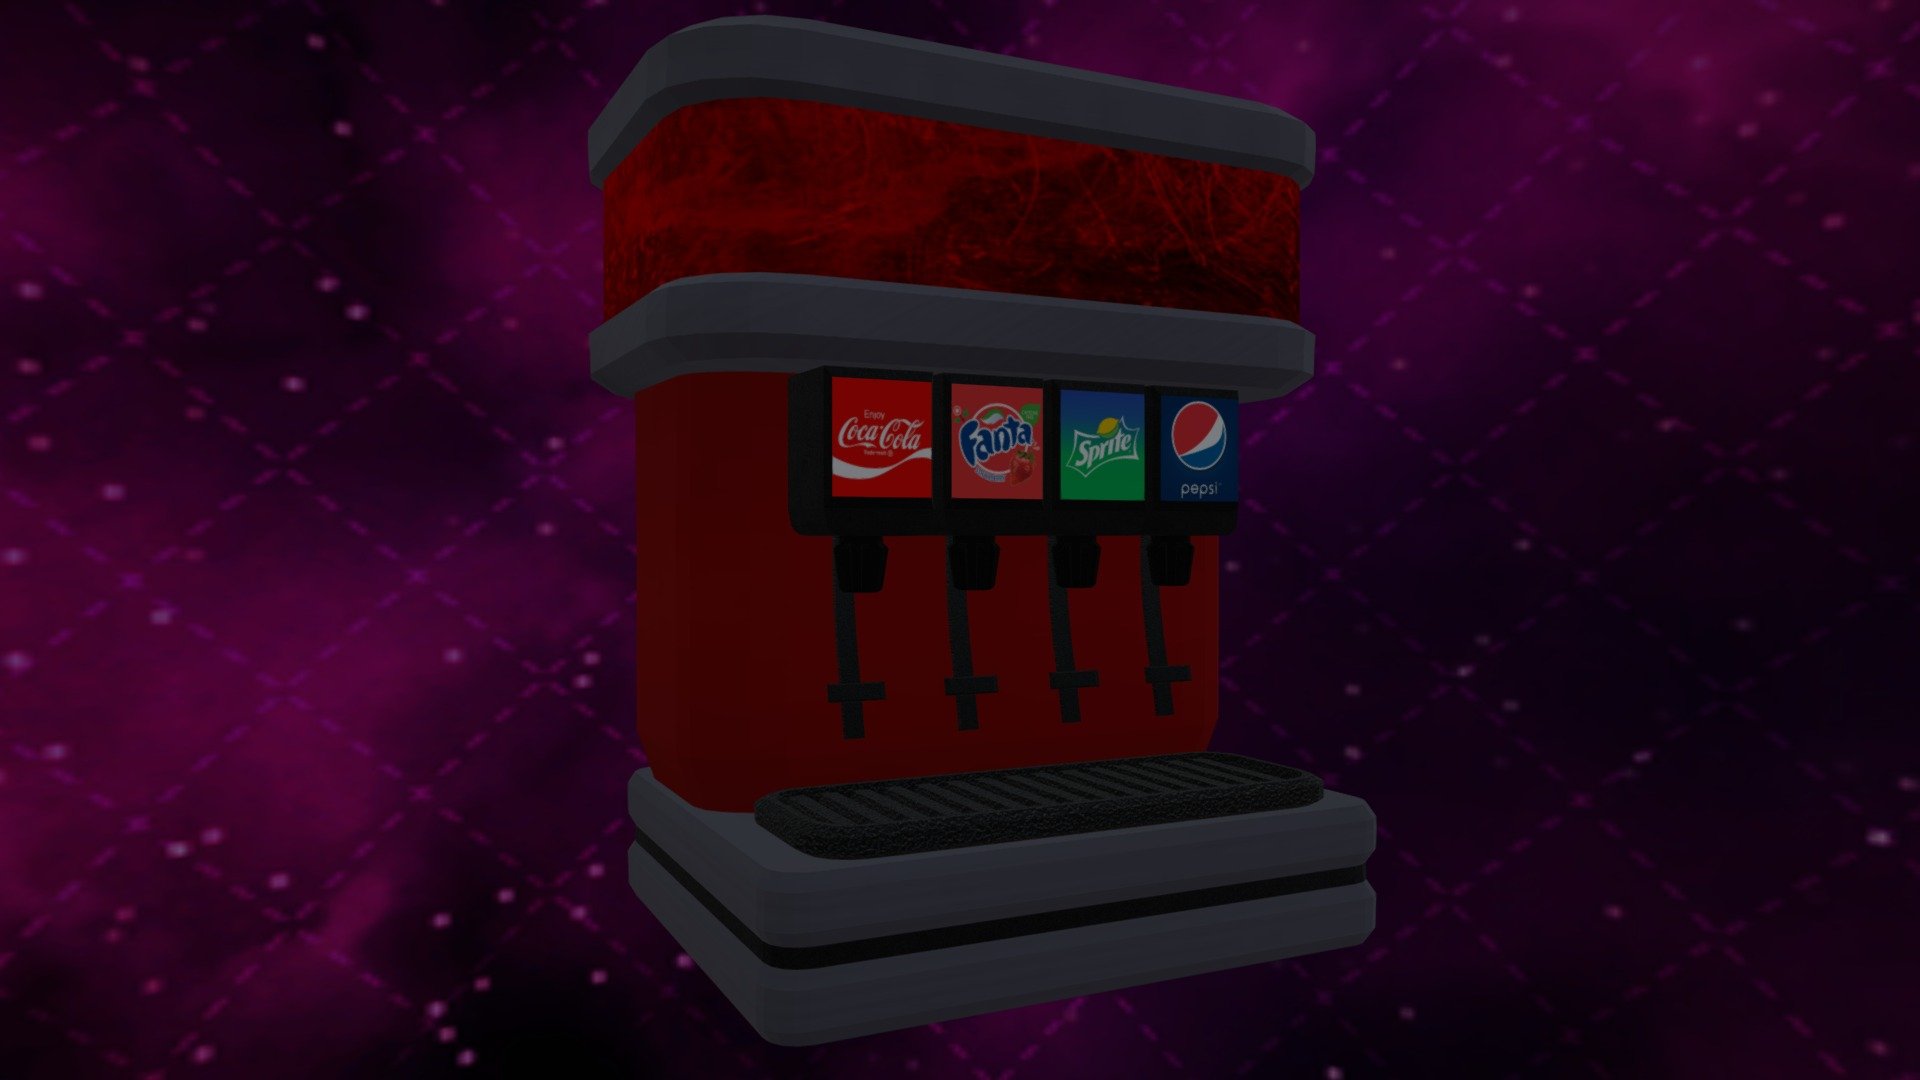 Introducing the Soda Dispenser made by ACBRadio, the programs used to make this object are as follows: Blender 2.92.0 &amp; G.I.M.P 2.10.4&hellip;The &lsquo;Textures' inclued in this object are the following, AO, Emit, Environment, Glossy, Normal, Roughness, Shadow, Transmission, UV, Deffuse&hellip;(Only the Deffuse map has been applied, do intend to fix this soon…Free of Charge

360 backdrop’s total poly count: Triangles: 4k Vertices: 2k

Soda Dispenser: Triangles: 3.4k Vertices: 1.9k

:D - Soda Dispenser FBX Low Poly FREE - Download Free 3D model by LordSamueliSolo (@LadyLionStudios) 3d model